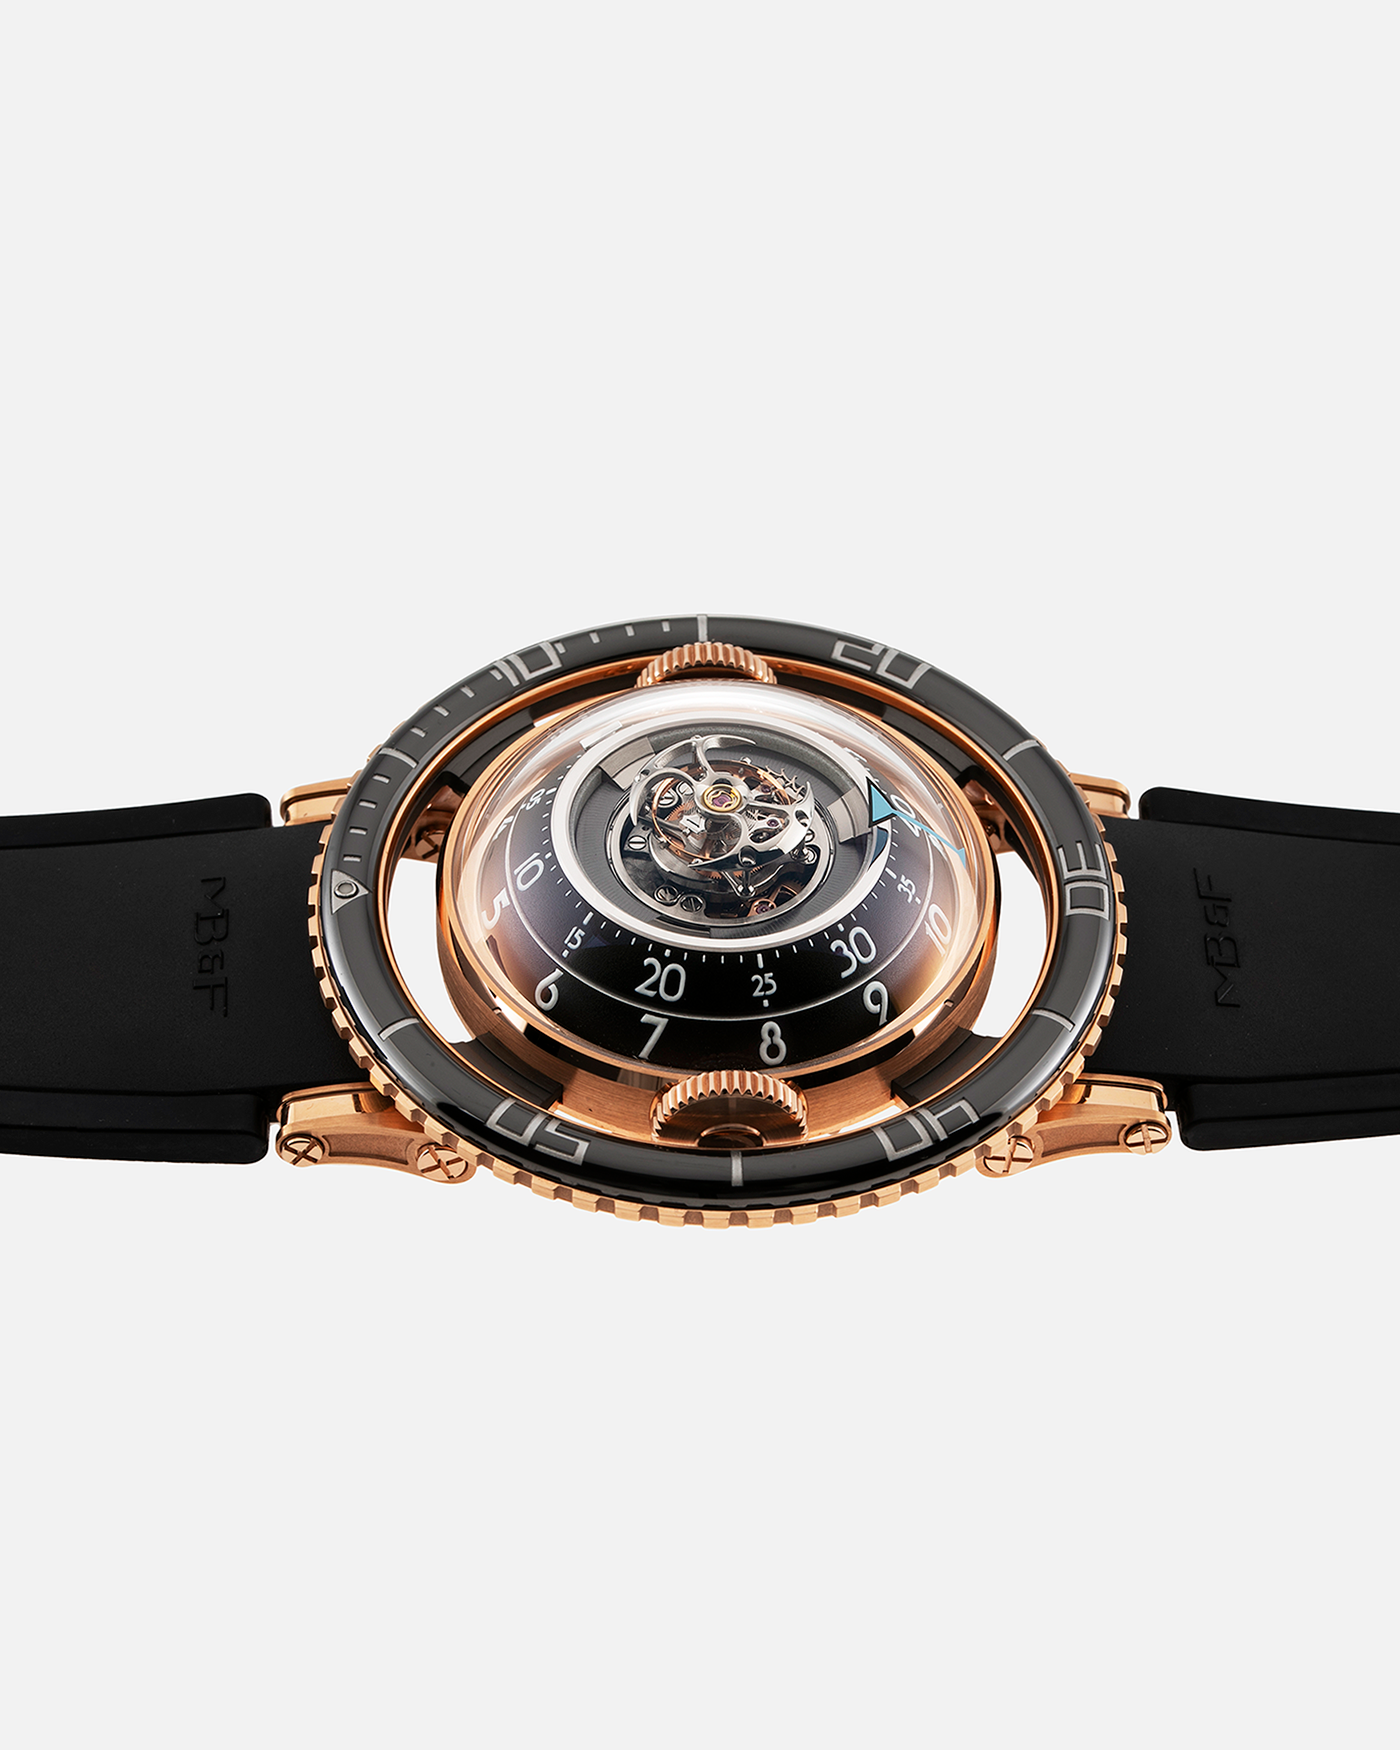 Brand: MB&F Year: 2022 Model: HM7 Aquapod Material: 18k Rose Gold Movement: In-House 3D Vertical Architecture MB&F HM7 Tourbillon Case Diameter: 53.8mm X 21.3mm With Articulating Lugs Bracelet/Strap: MB&F Black Rubber Strap with 18k Rose Gold Deployant Clasp